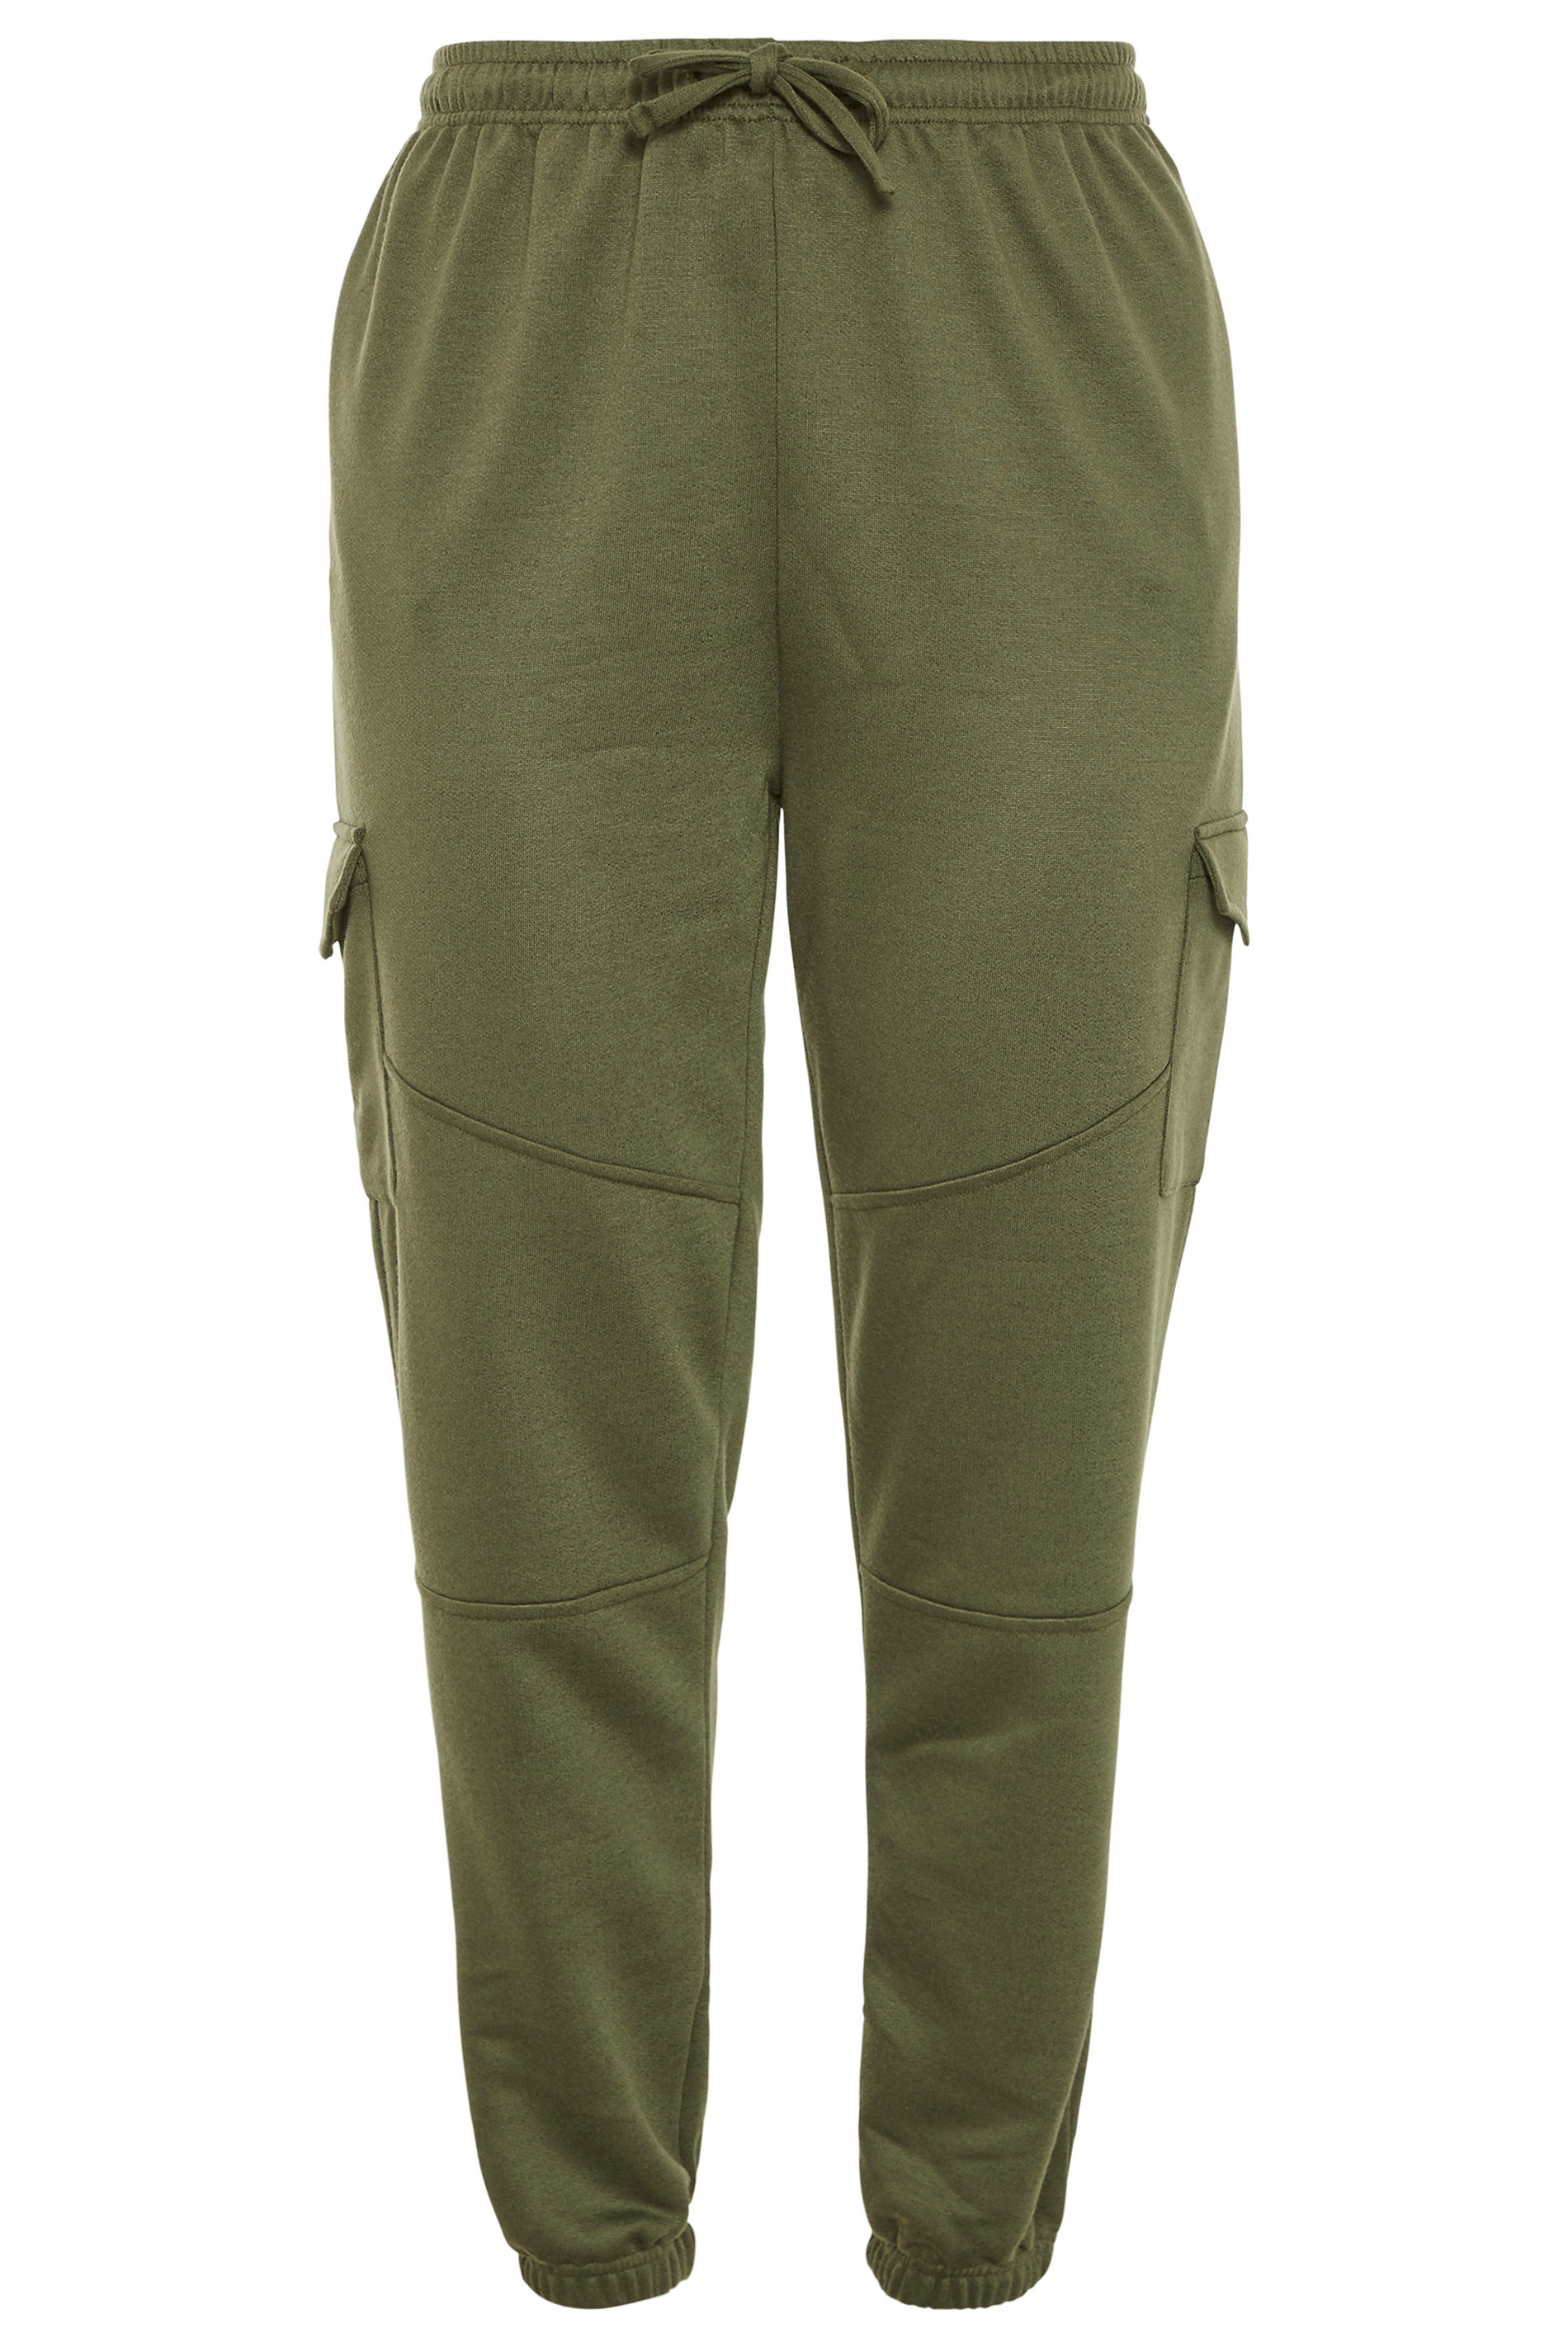 LIMITED COLLECTION Khaki Green Utility Joggers | Yours Clothing